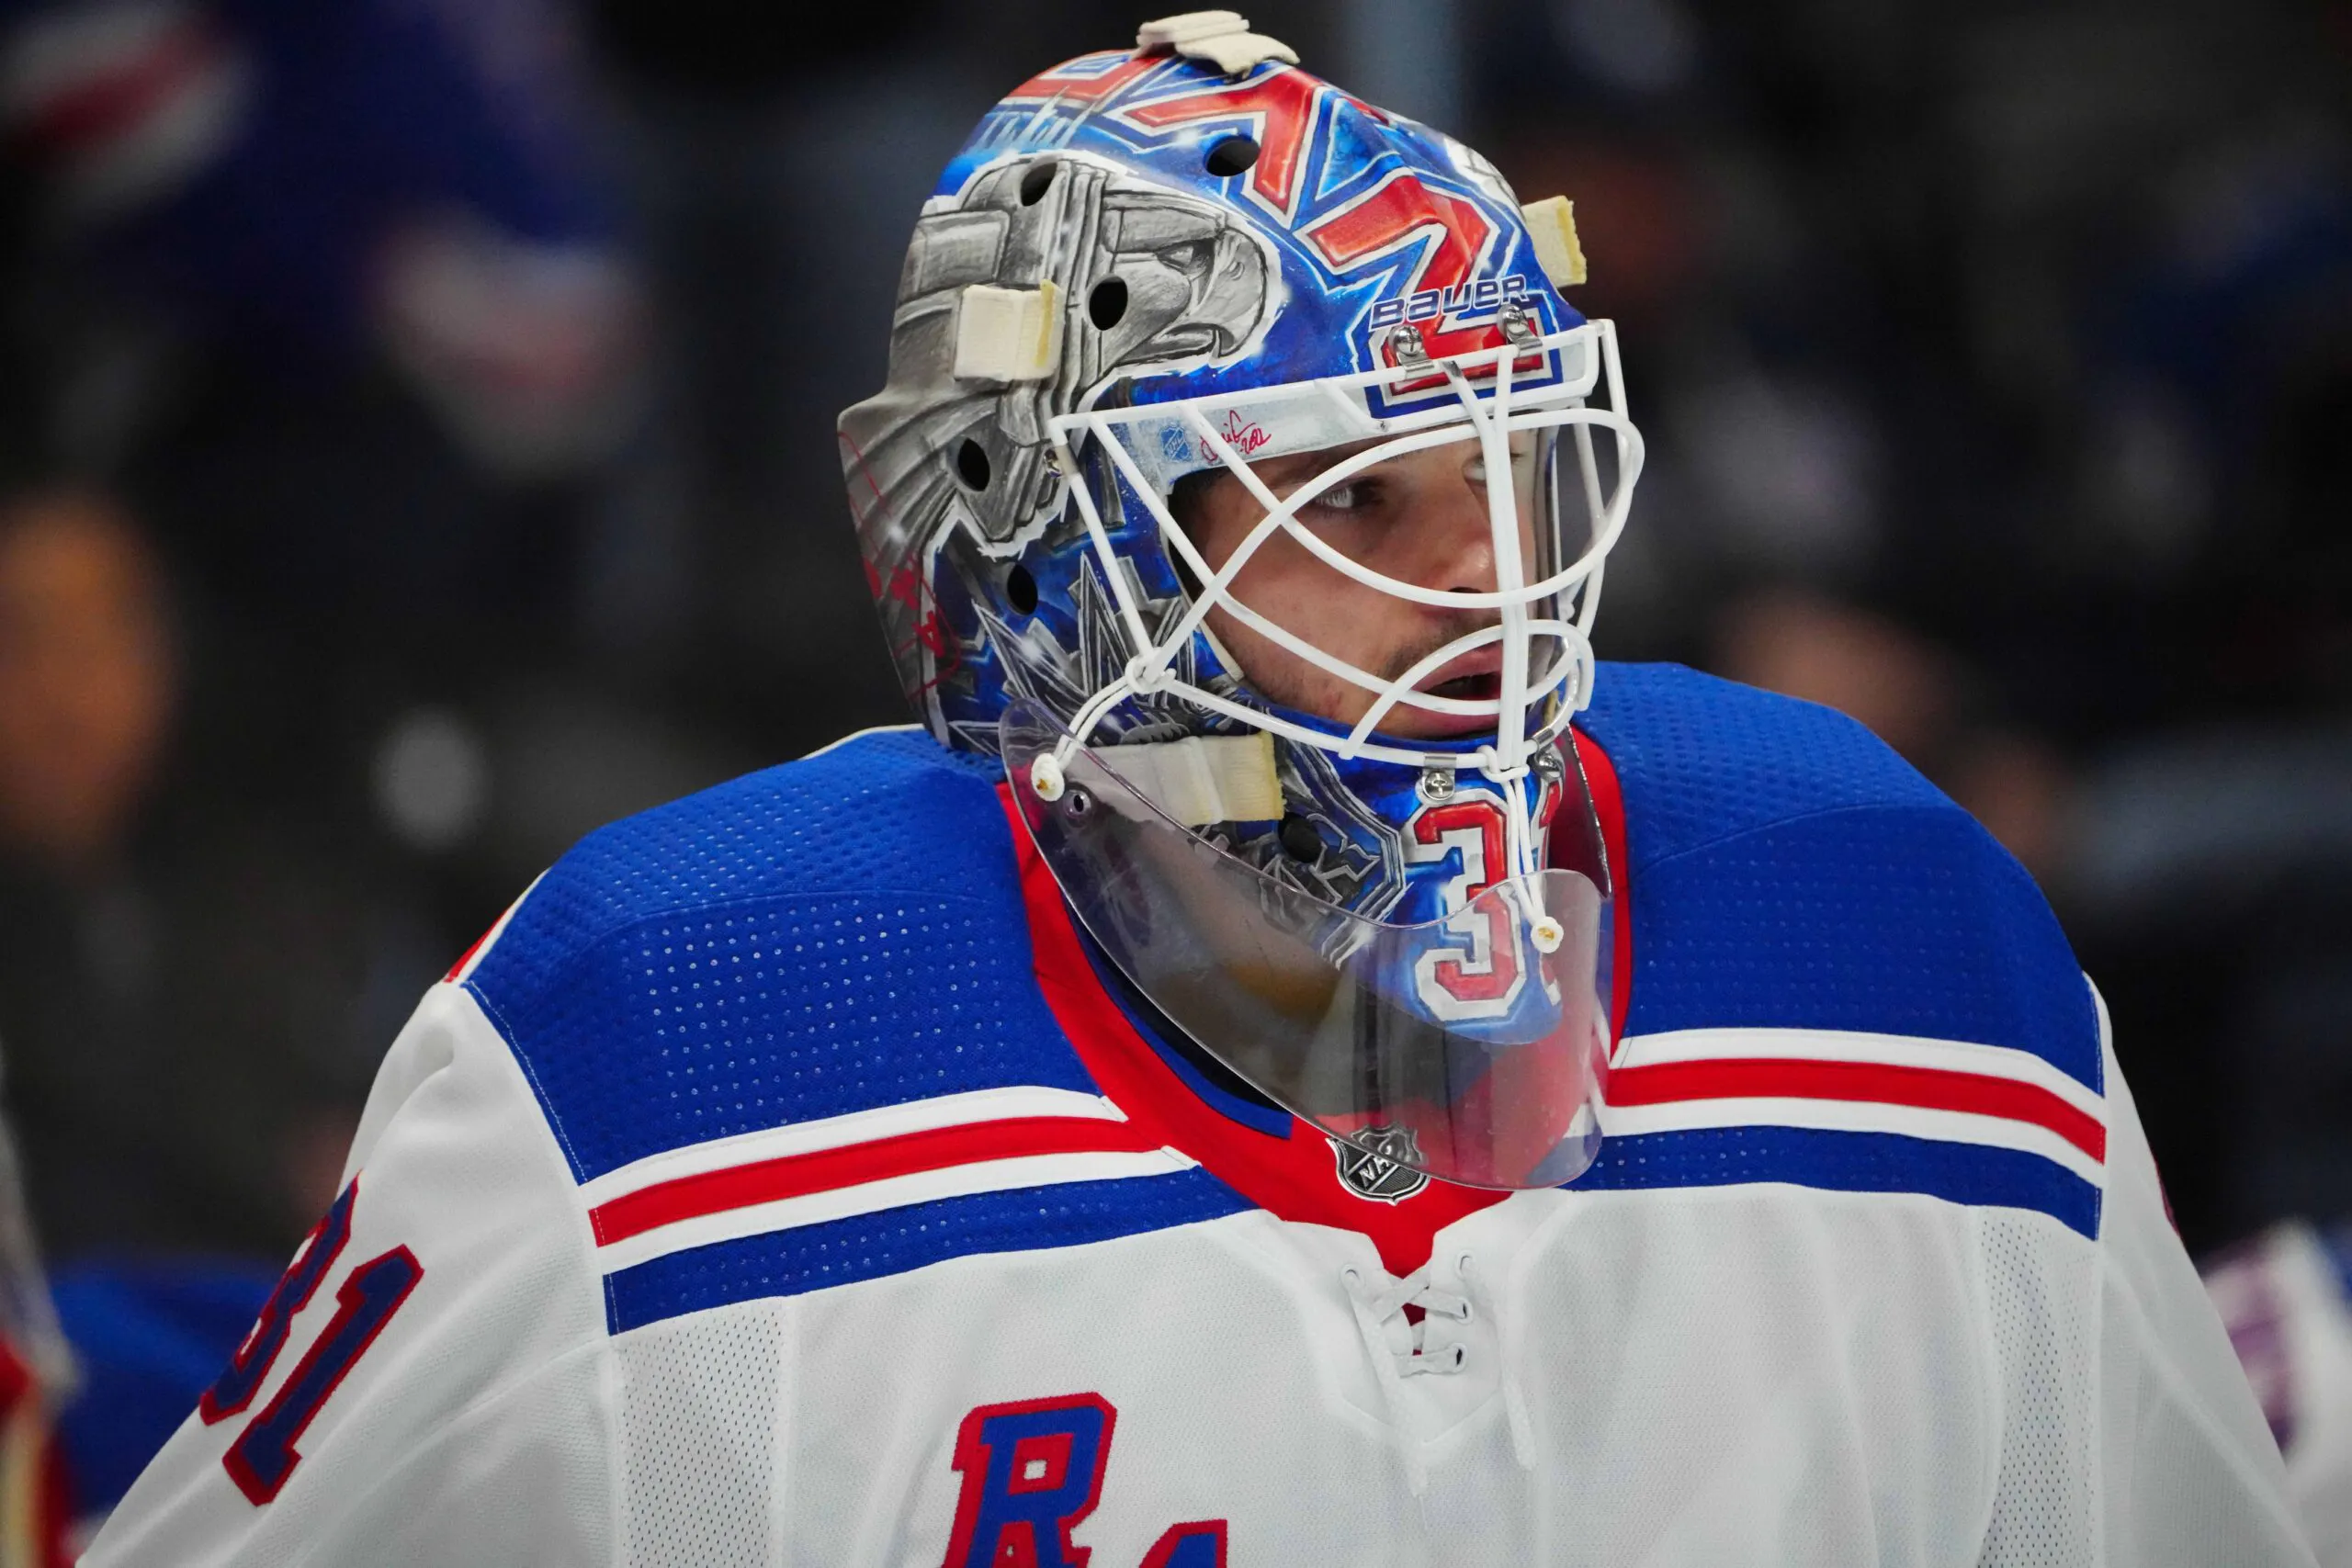 The Top 5 NHL goaltenders of 2022